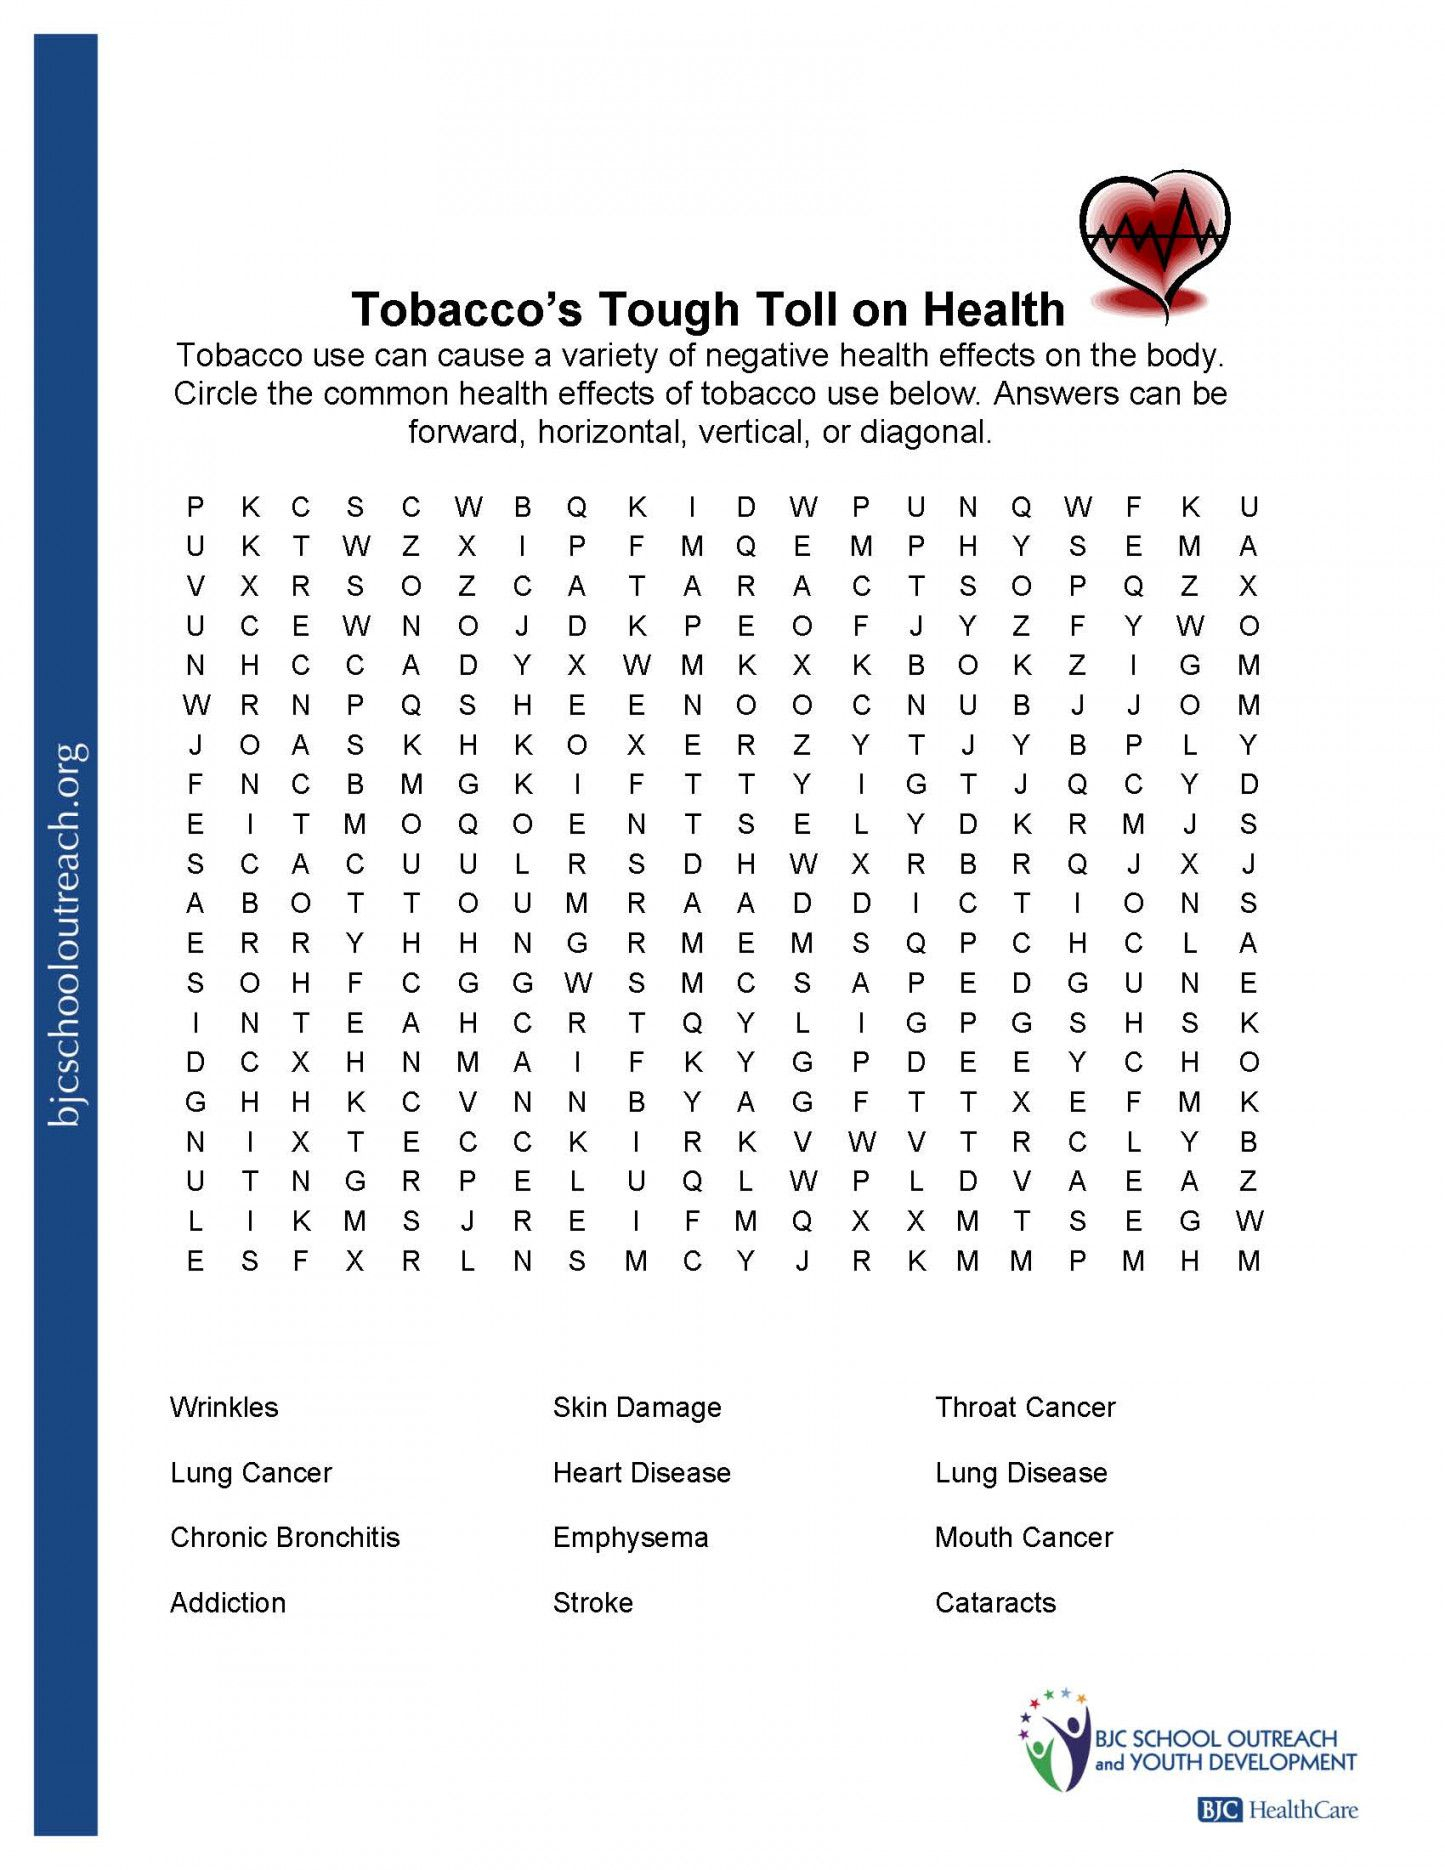 Free Printable Health Worksheets For Middle School | Lostranquillos - Free Printable Health Worksheets For Middle School